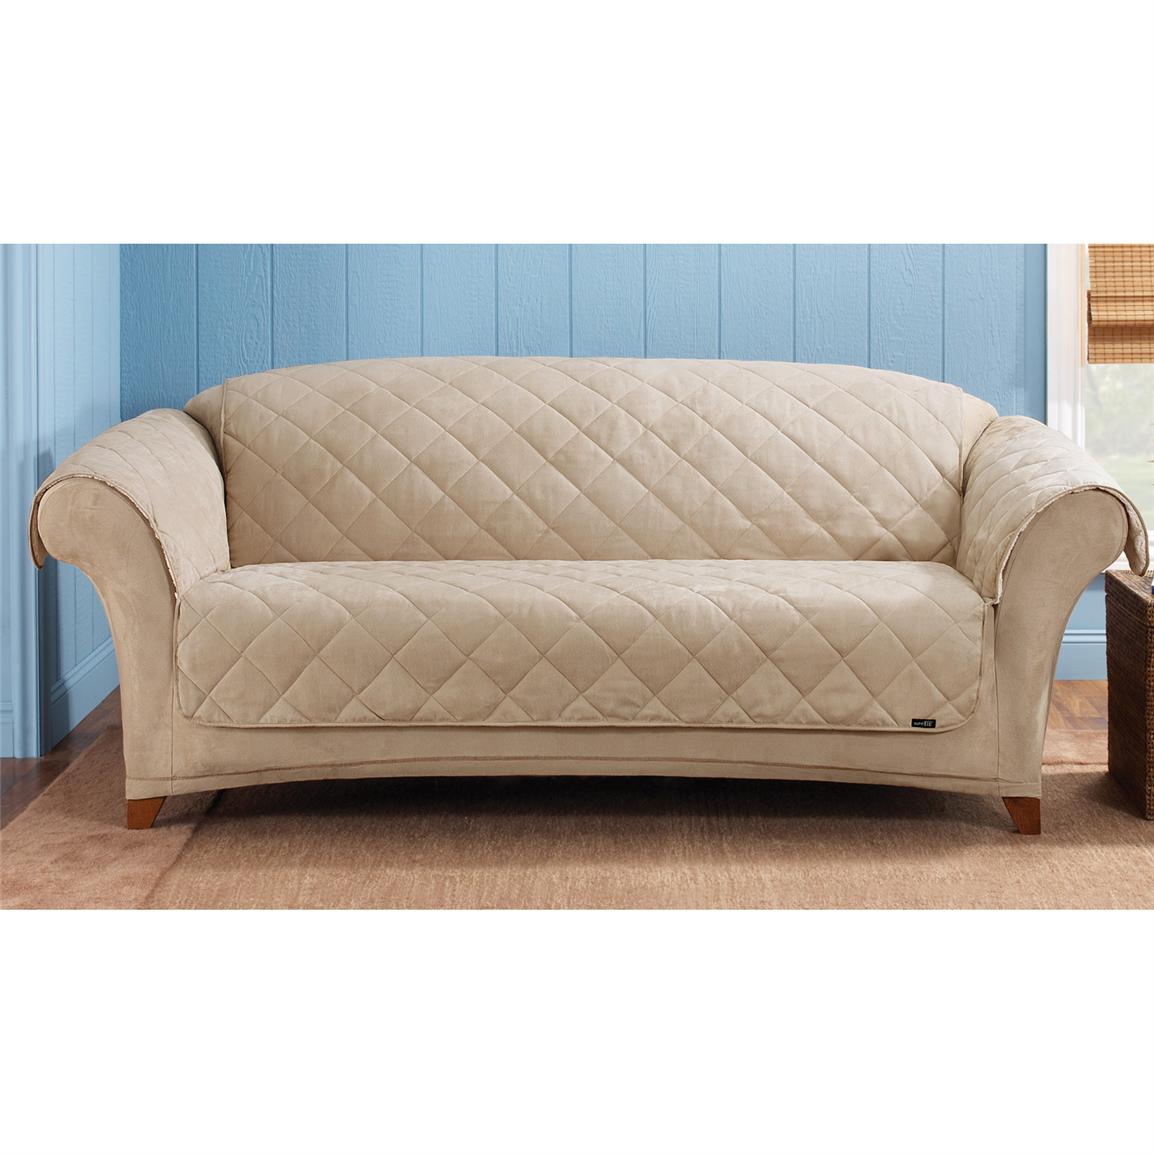 Sure Fit Reversible Suede Sherpa Sofa Pet Cover 292849